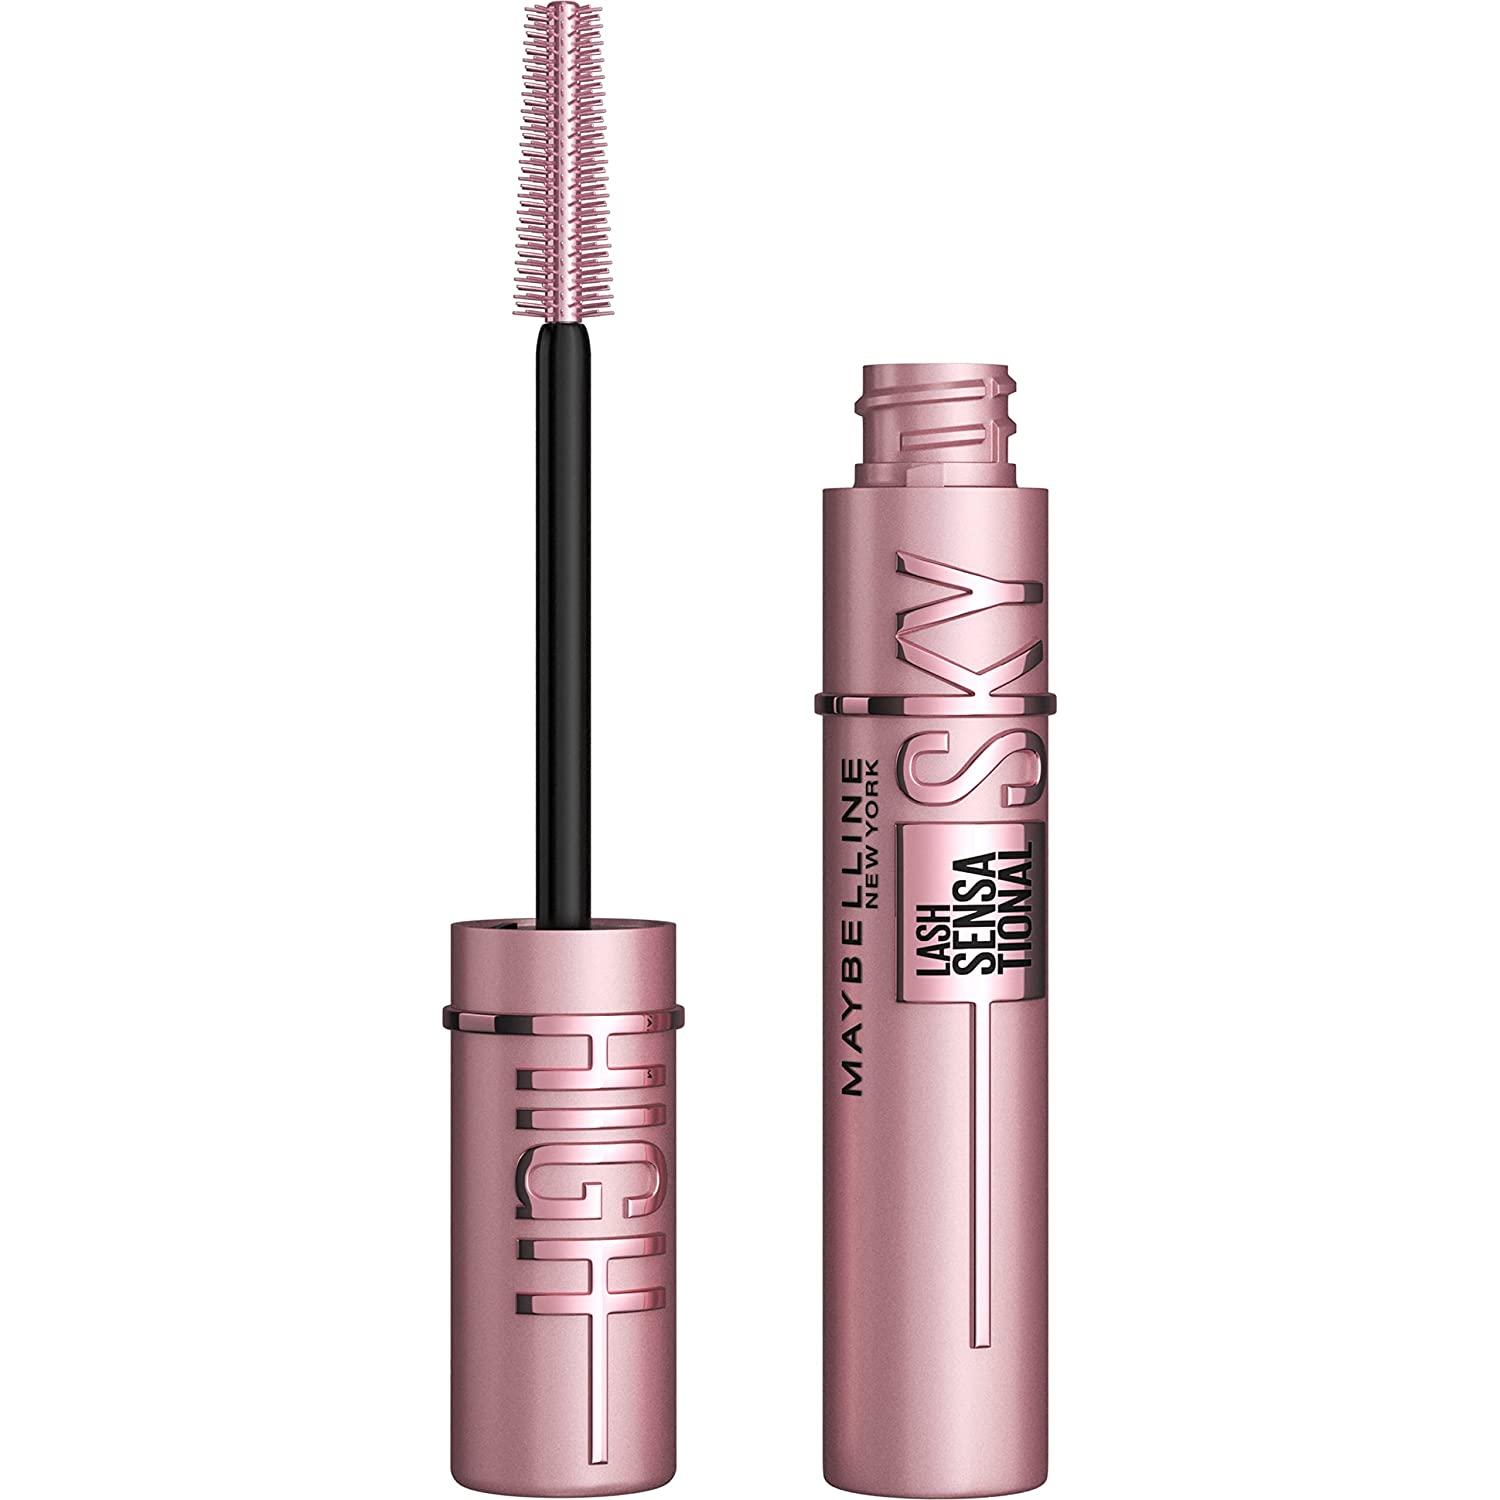 Maybelline's TikTok sensation mascara brings fluttery, long lashes without breaking the bank. The flexible wand ensures an even application, making it a go-to in my collection of volumizing mascaras.